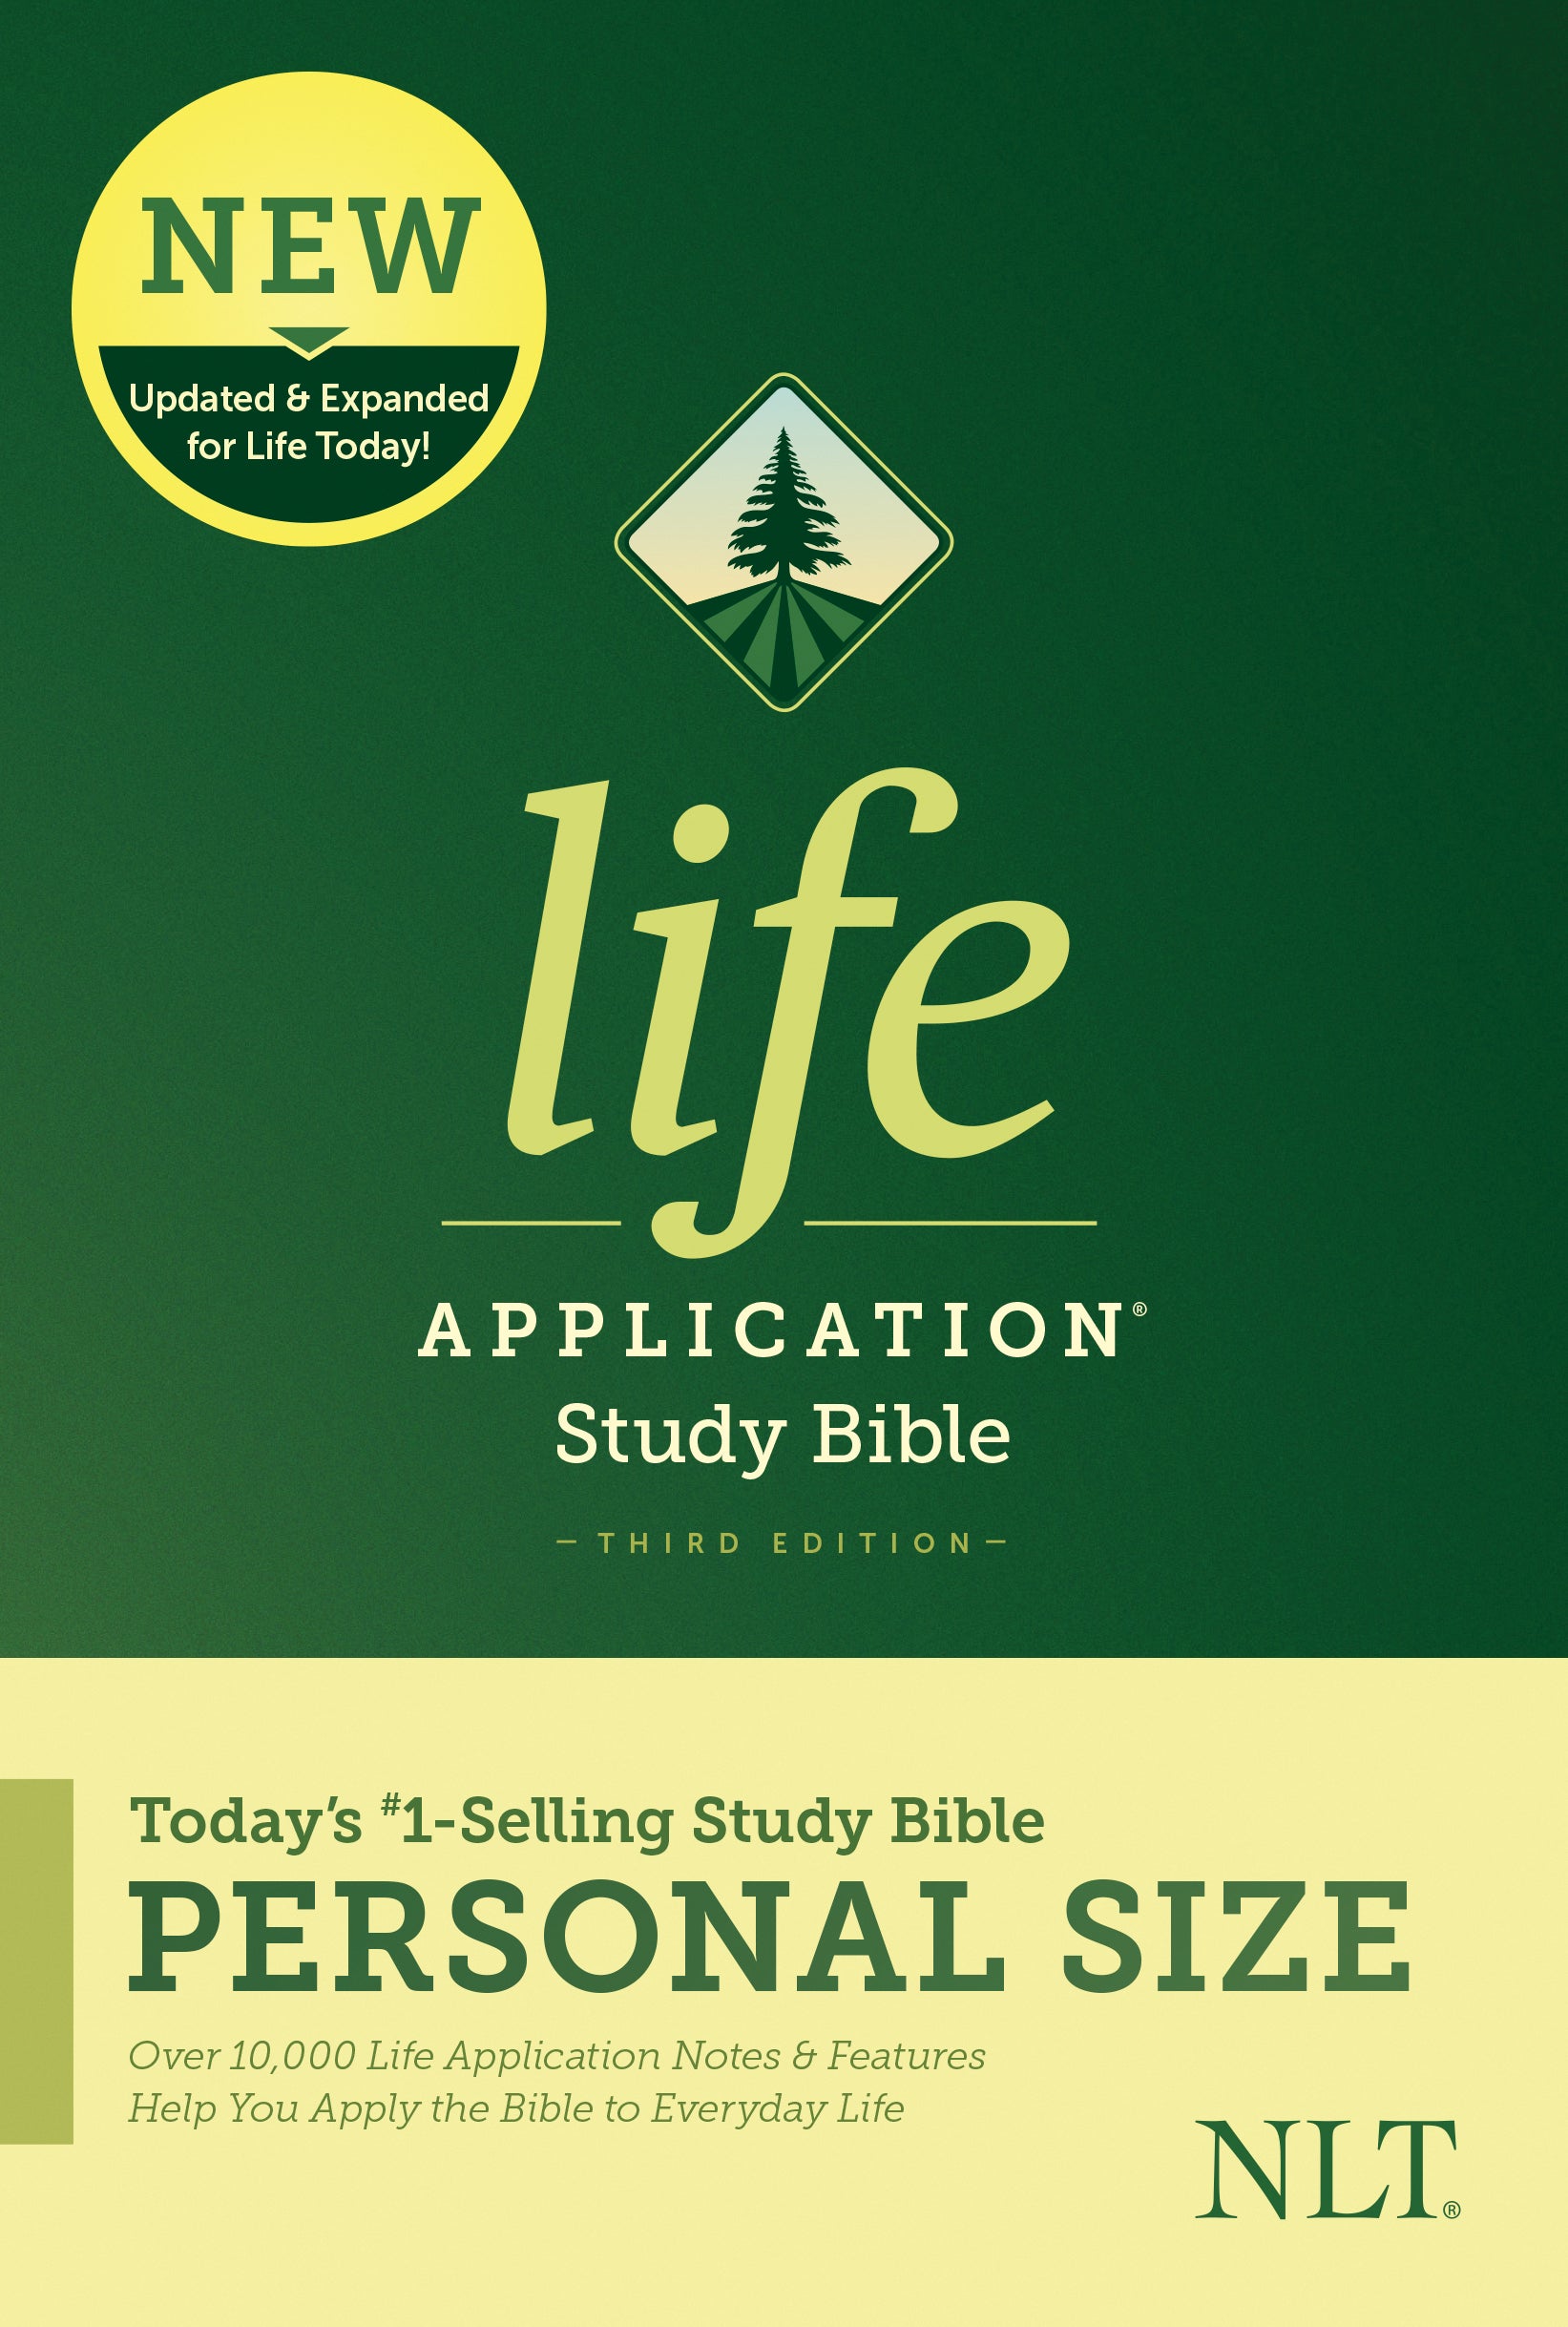 Image of NLT Life Application Study Bible, Third Edition, Personal Size, Paperback, Maps, Single Column, Book Introductions, Life Application Notes other